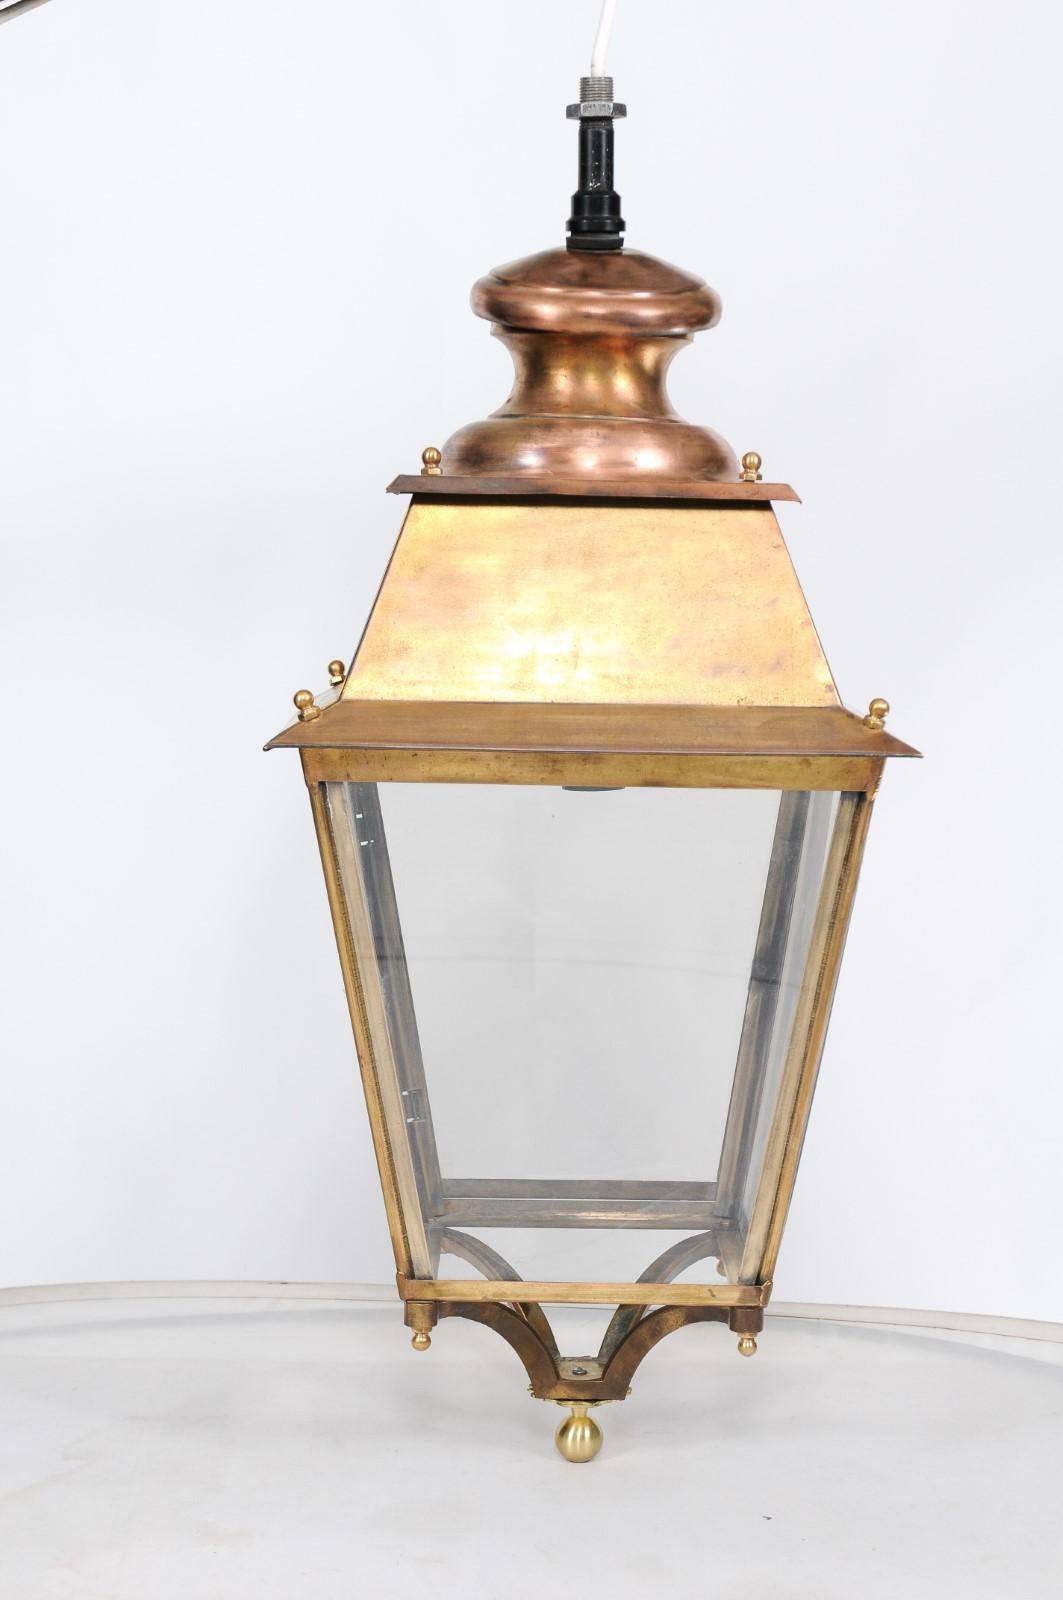 20th Century Pair of French Copper and Plexiglass Lanterns with Brass Accents from the 1920s